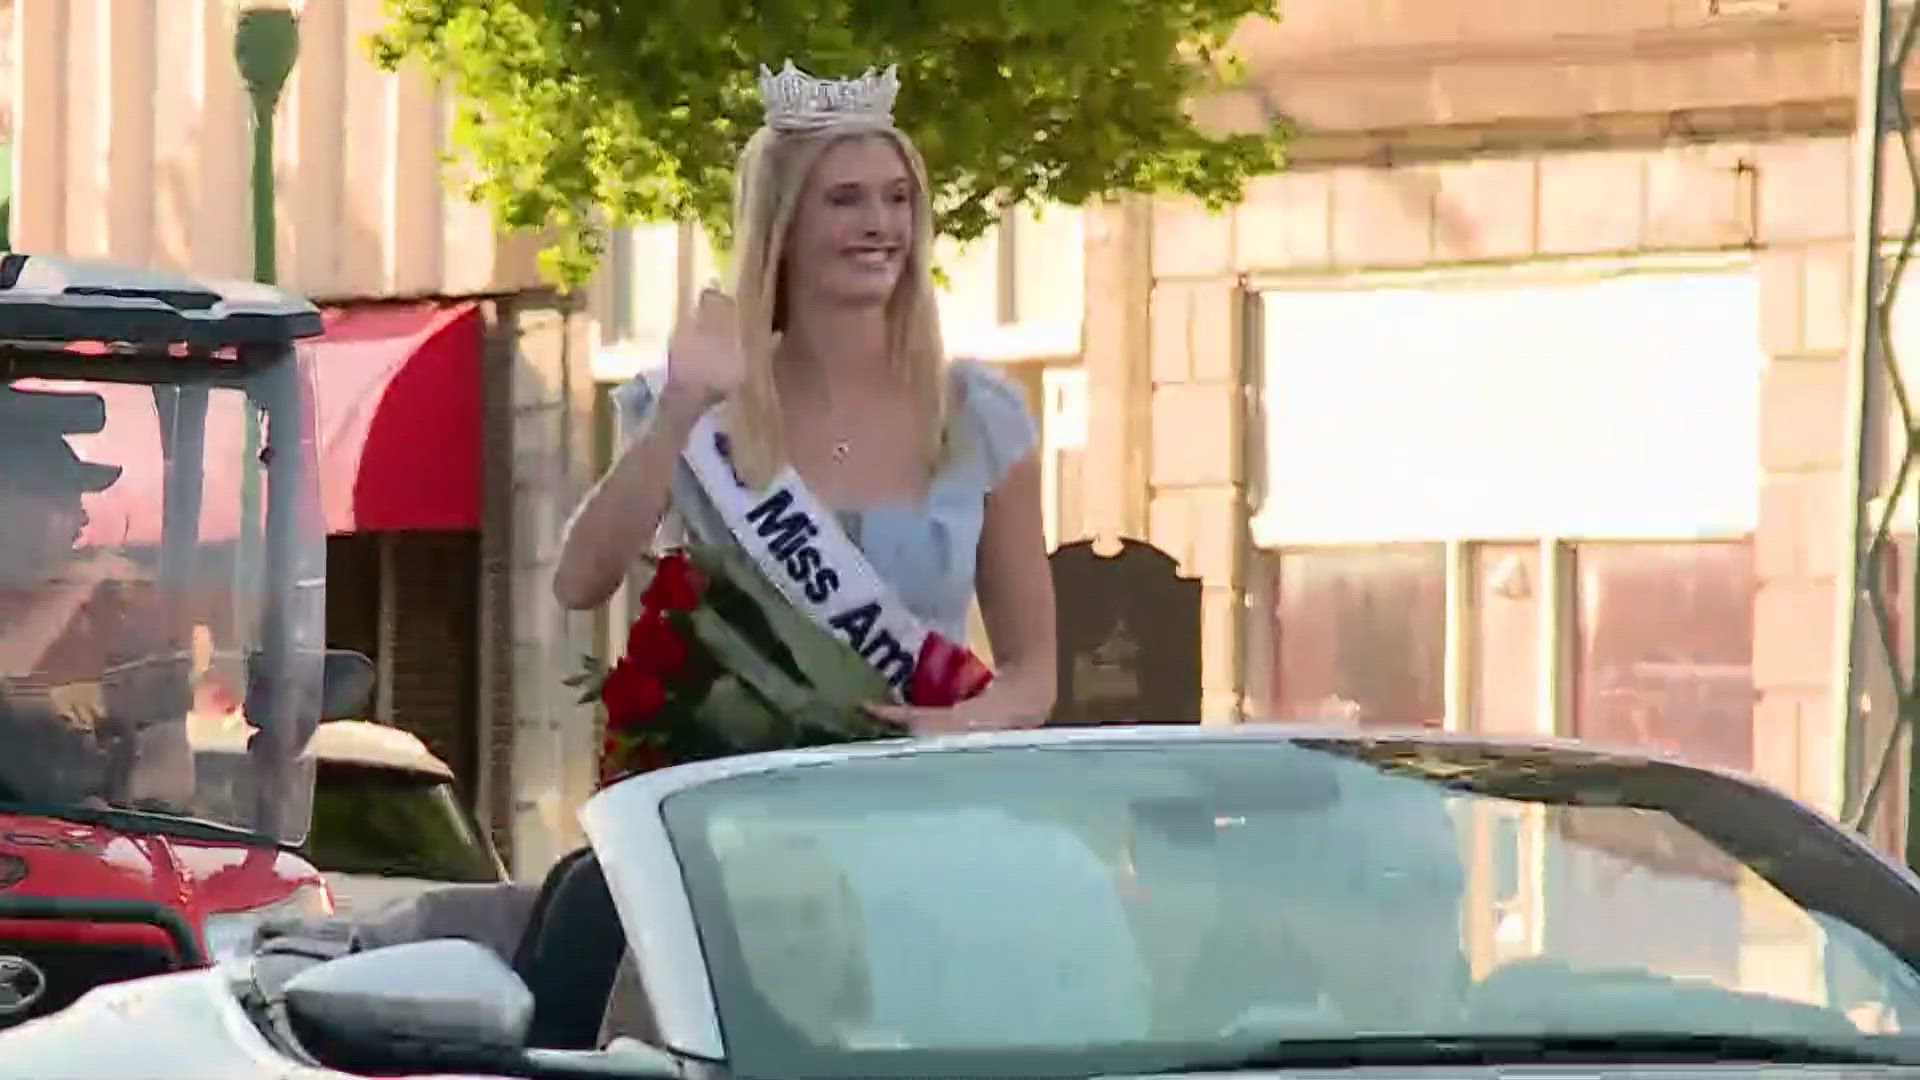 5NEWS was onsite for the homecoming parade celebrating 2024's Miss America Madison Marsh